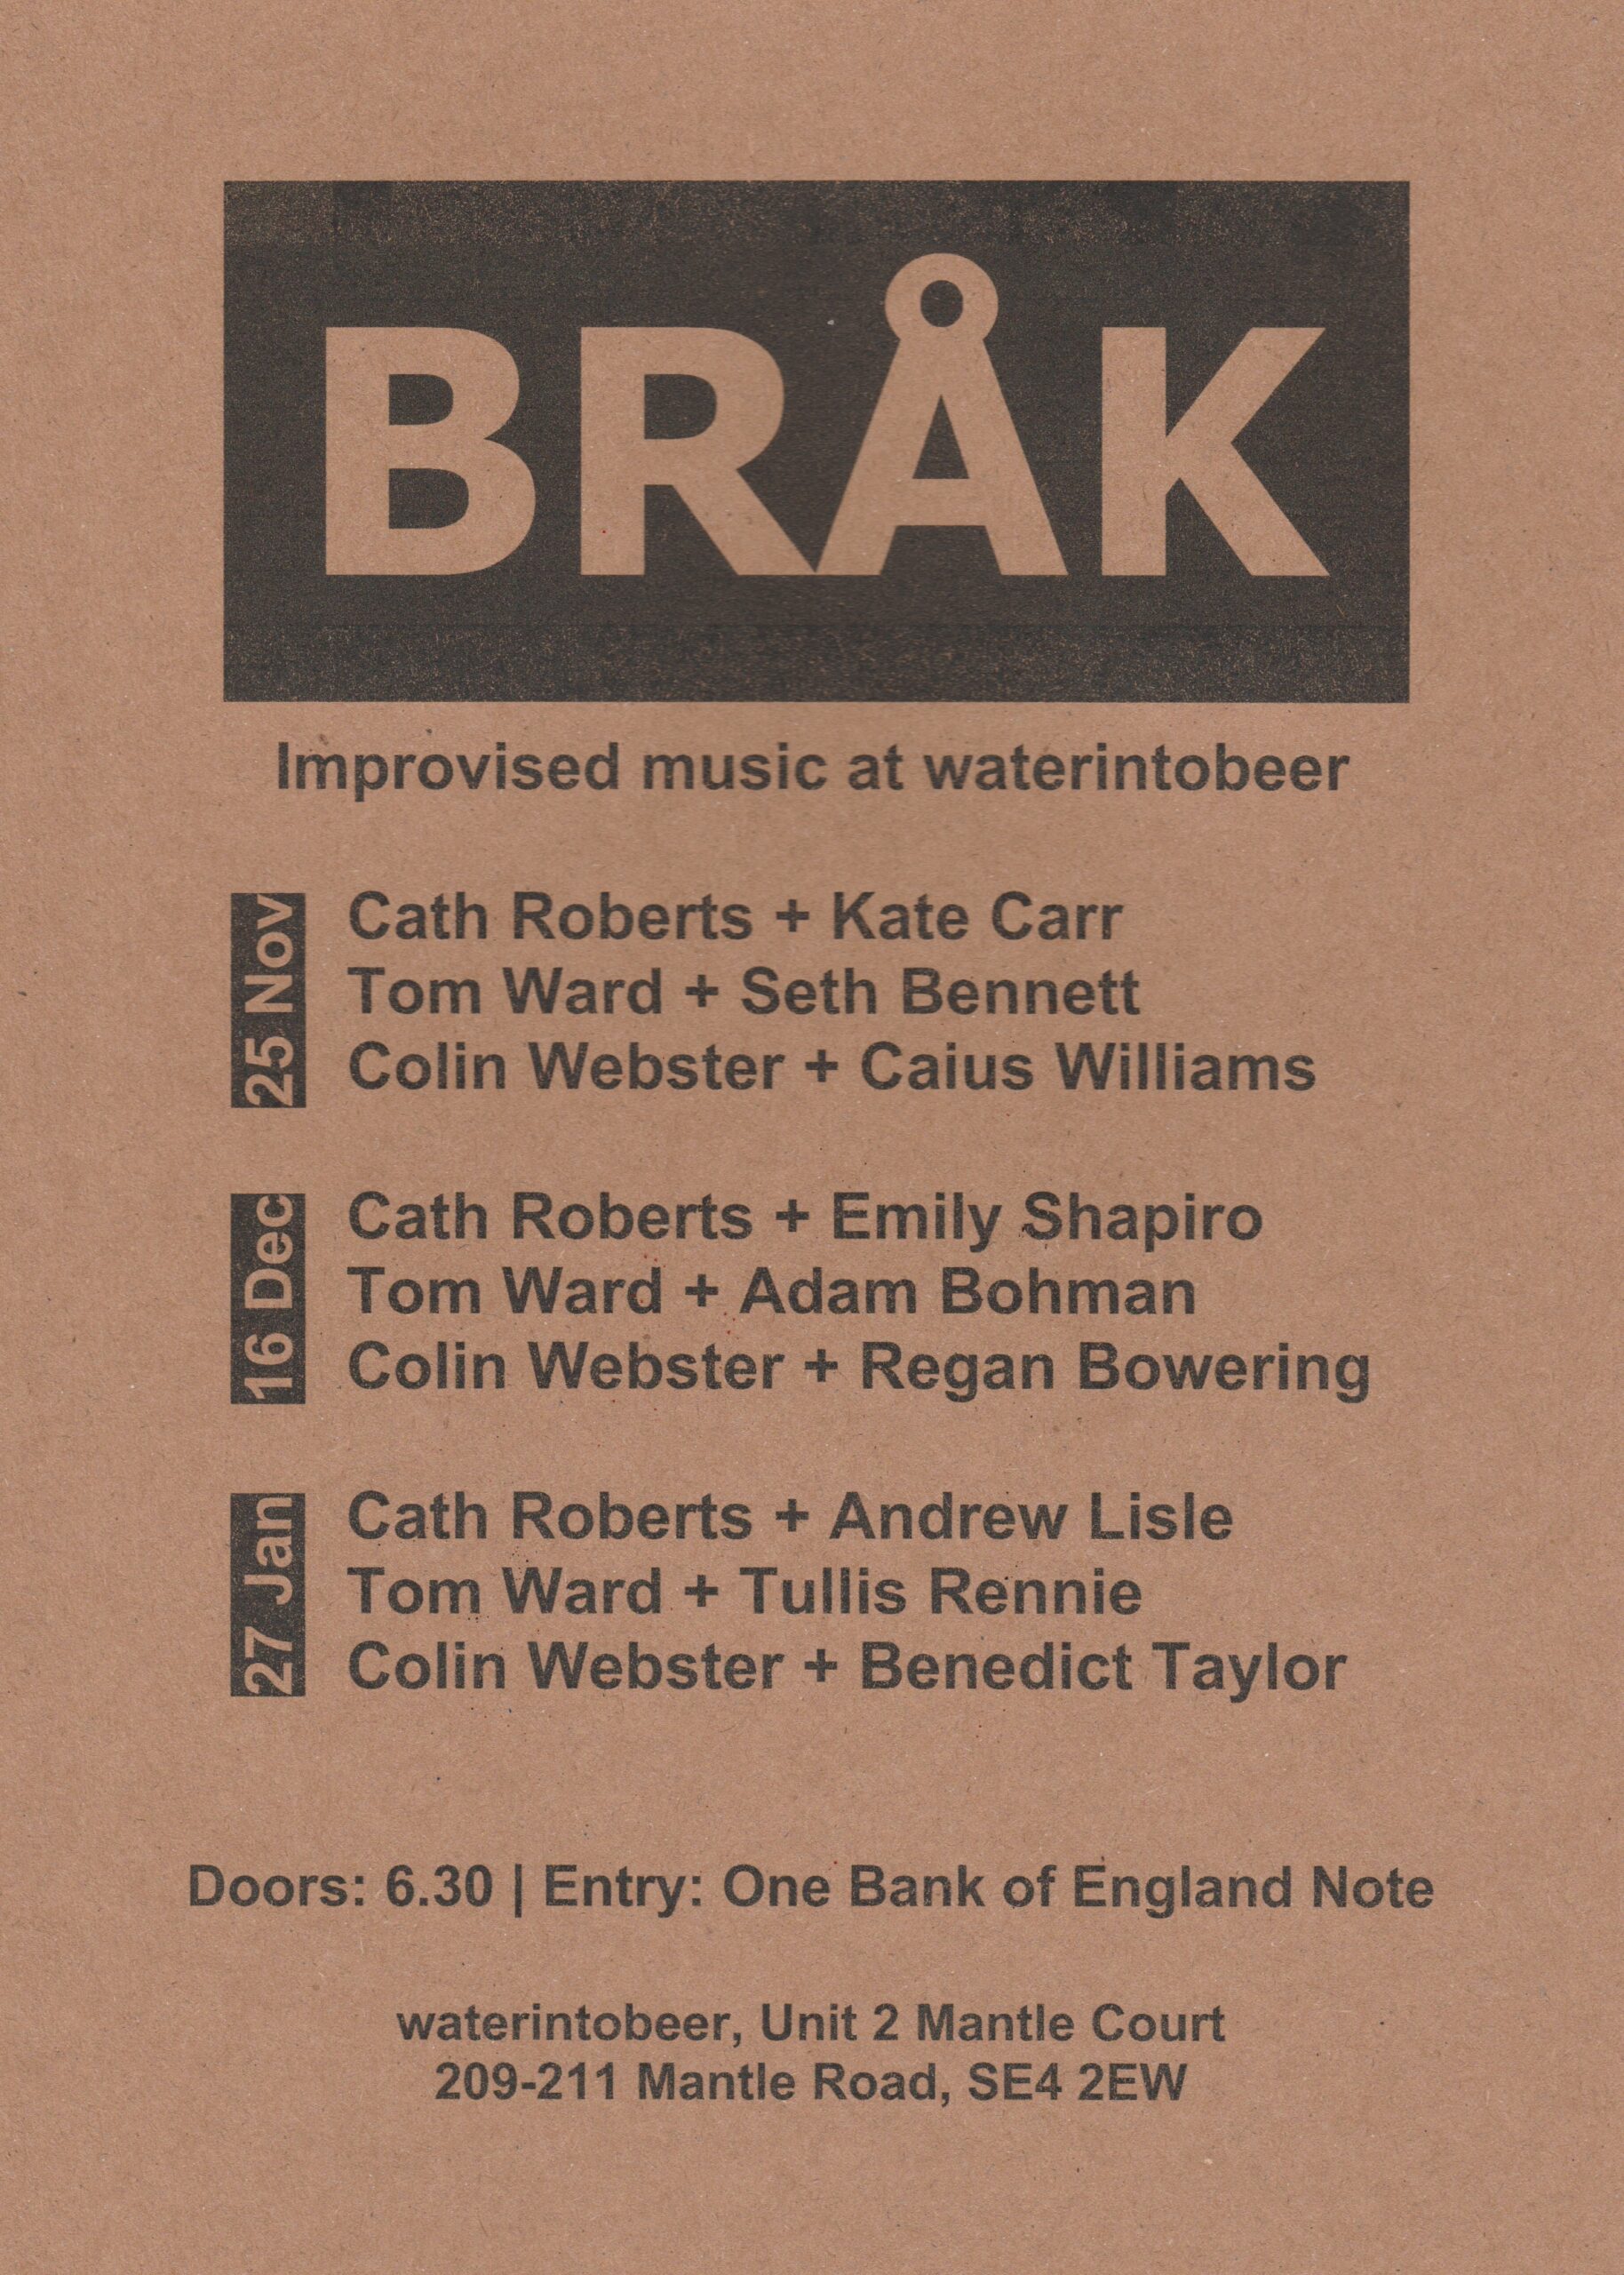 Brak programme as an image is here